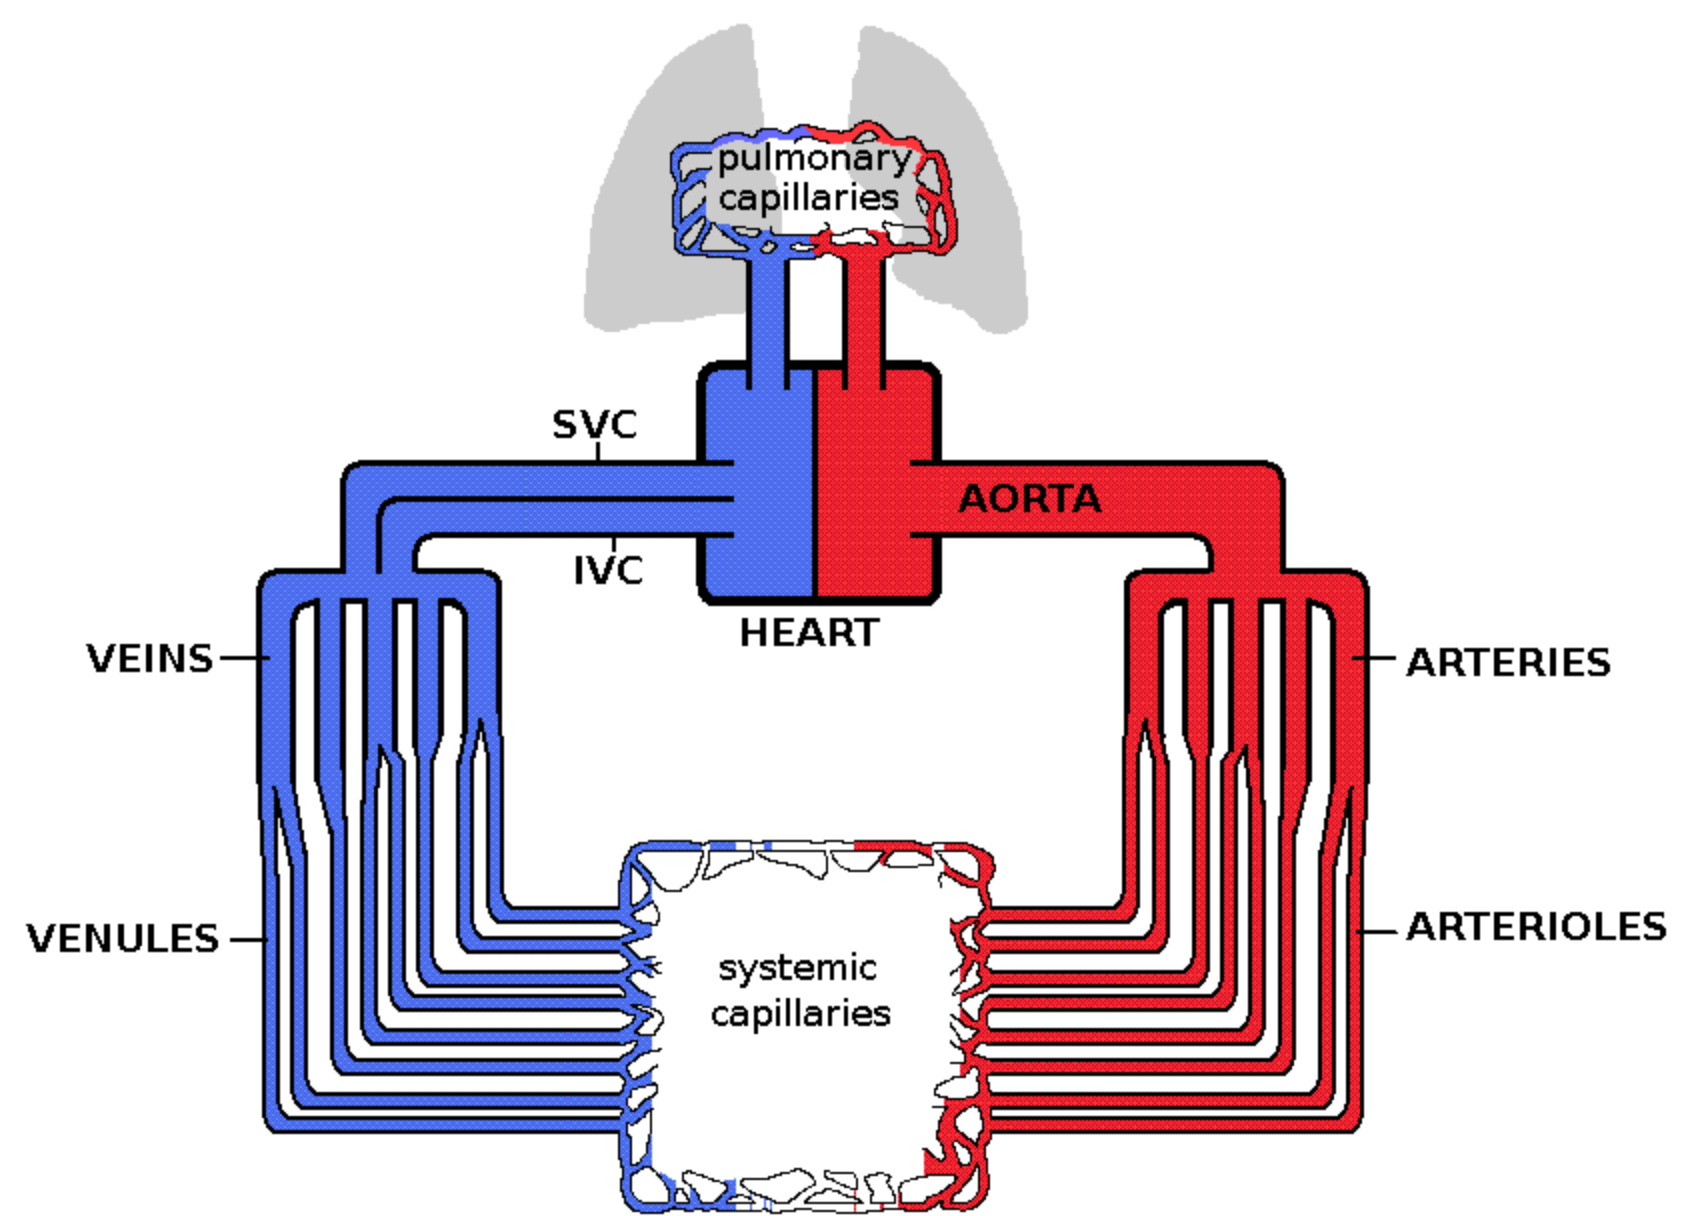 A simplified schematic of the human circulatory system showing the pathway of oxygenated and deoxygenated blood through the systemic and pulmonary capillaries. Oxygenated blood flows from the left heart into the aorta, arteries, and arterioles to the systemic capillaries. Here gas exchange occurs, and deoxygenated blood travels up the venules, veins, and superior and inferior vena cavas to the right heart. From the right heart, the blood is sent to the lungs to become oxygenated by the gas exchange in the pulmonary capillary beds before returning to the left heart.